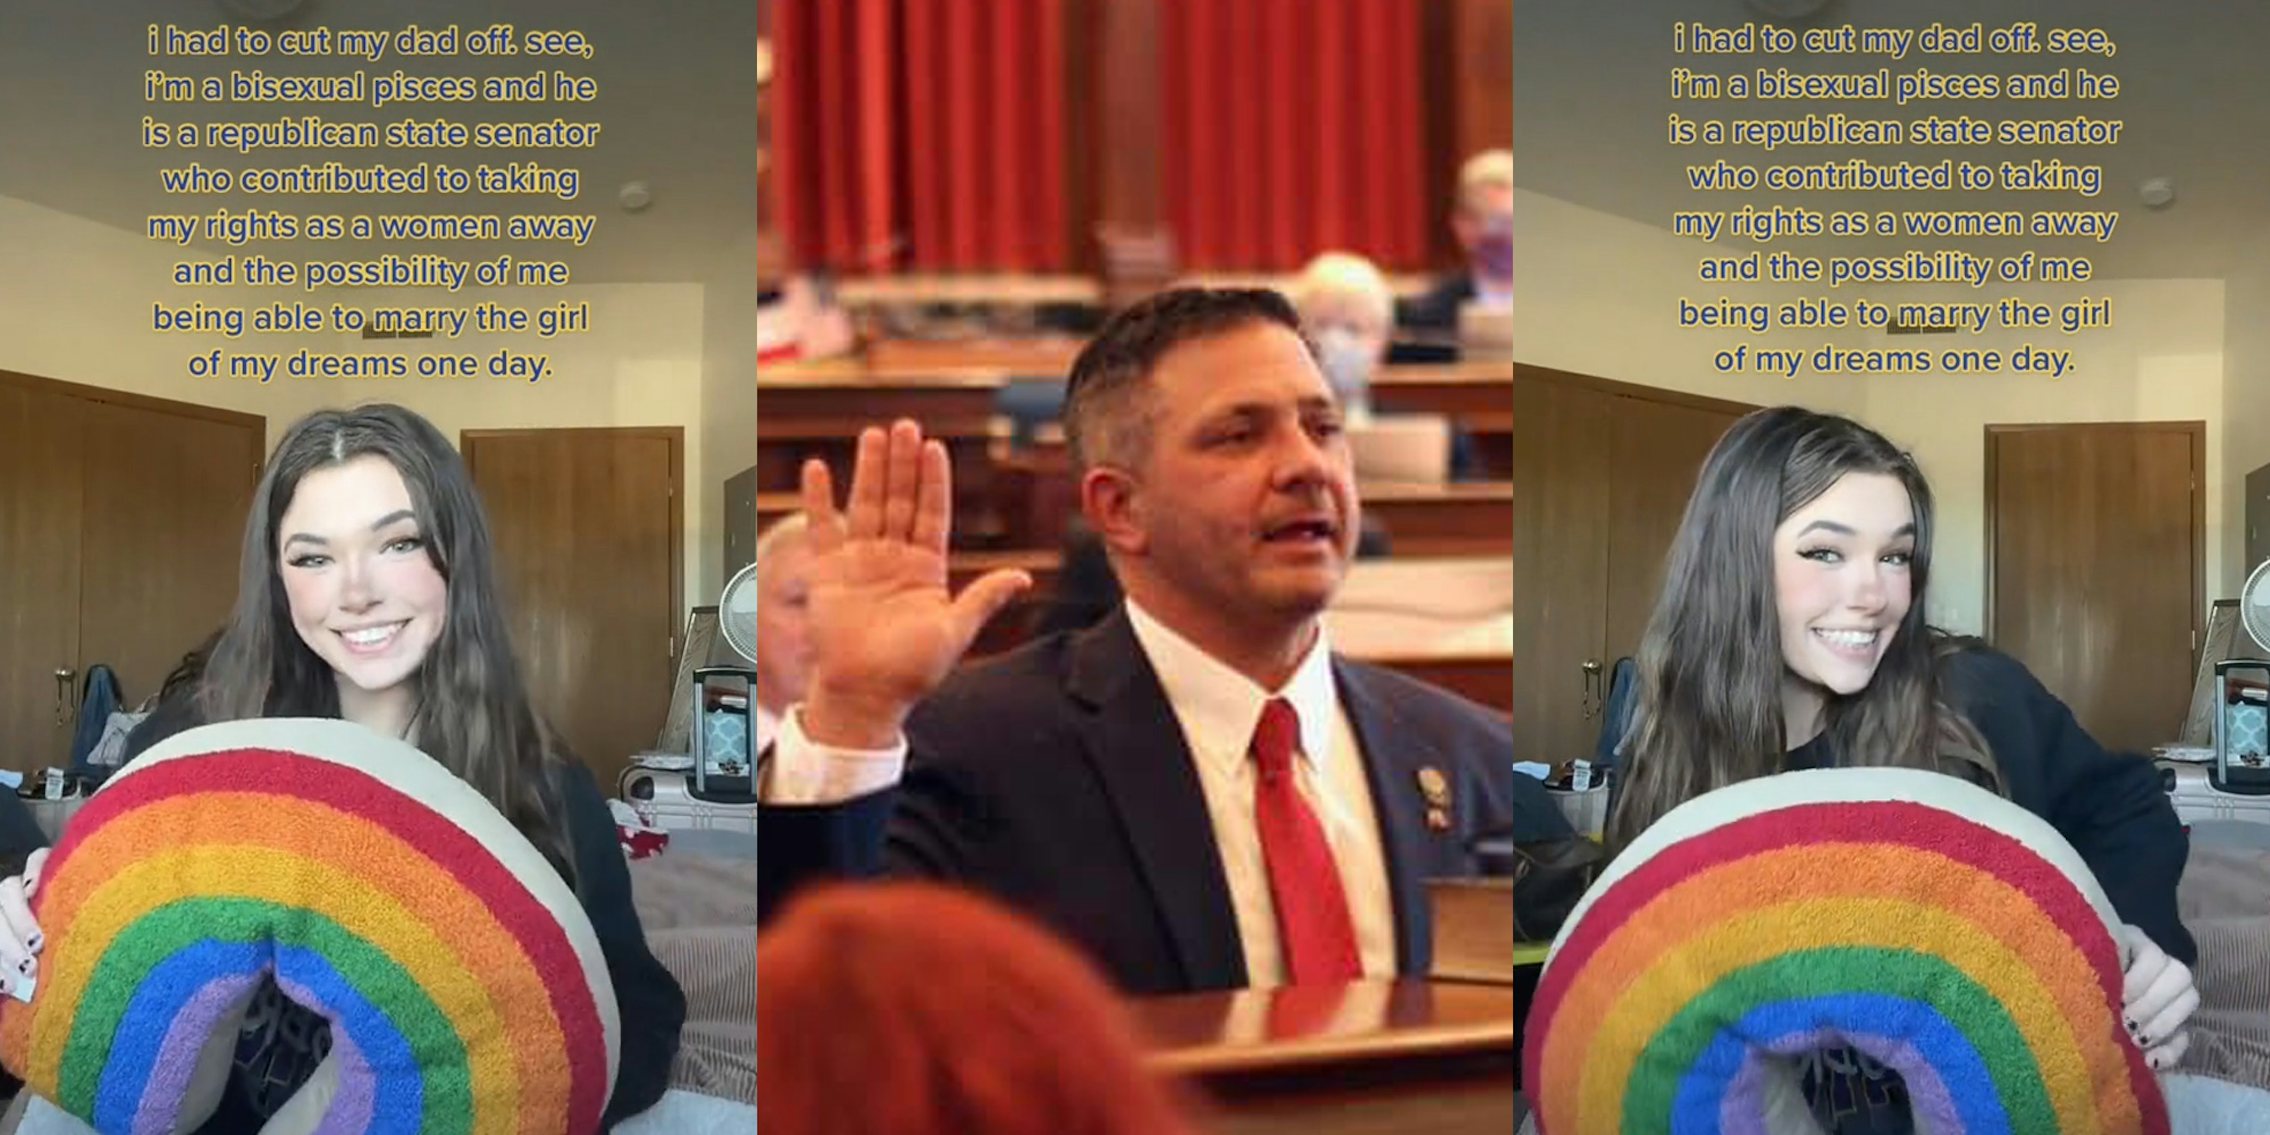 woman holding rainbow pillow caption 'i had to cut my dad off. see, i'm a bisexual pisces and he is a republican state senator who contributed to taking my rights as a woman away and the possibility of me being able to marry the girl of my dreams one day.' (l) Adrian Dickey right arm raised in court (c) woman holding rainbow pillow caption 'i had to cut my dad off. see, i'm a bisexual pisces and he is a republican state senator who contributed to taking my rights as a woman away and the possibility of me being able to marry the girl of my dreams one day.' (r)